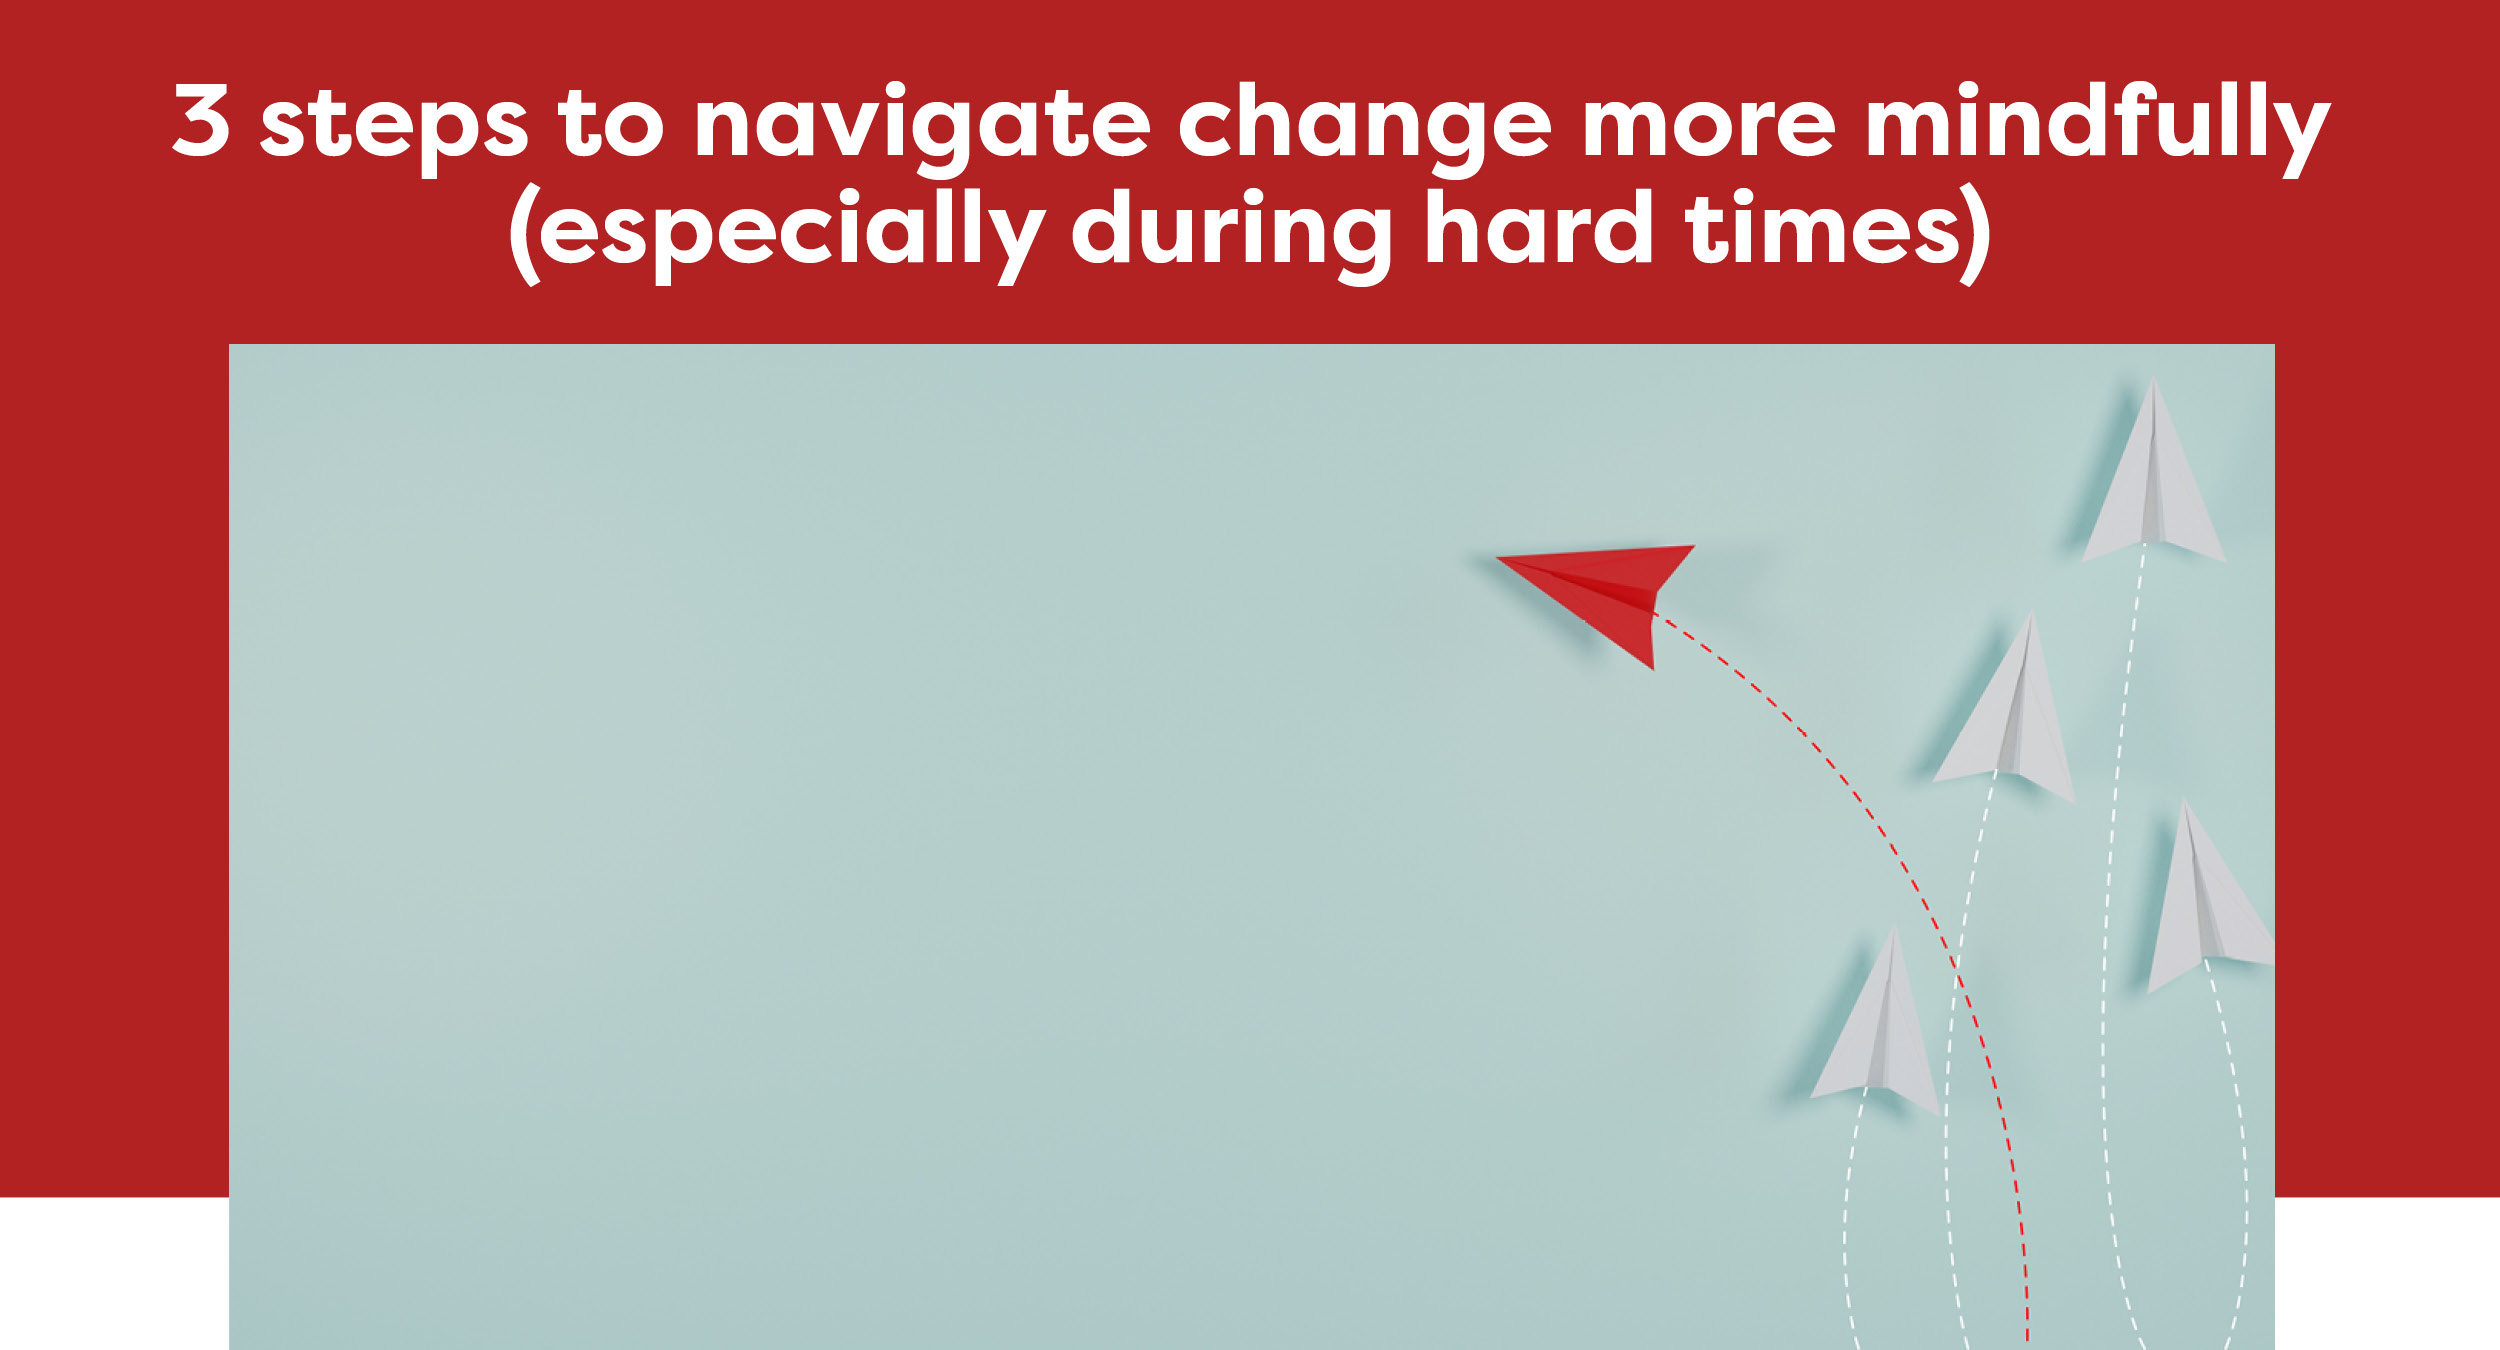 3 steps to navigate change more mindfully (especially during hard times)